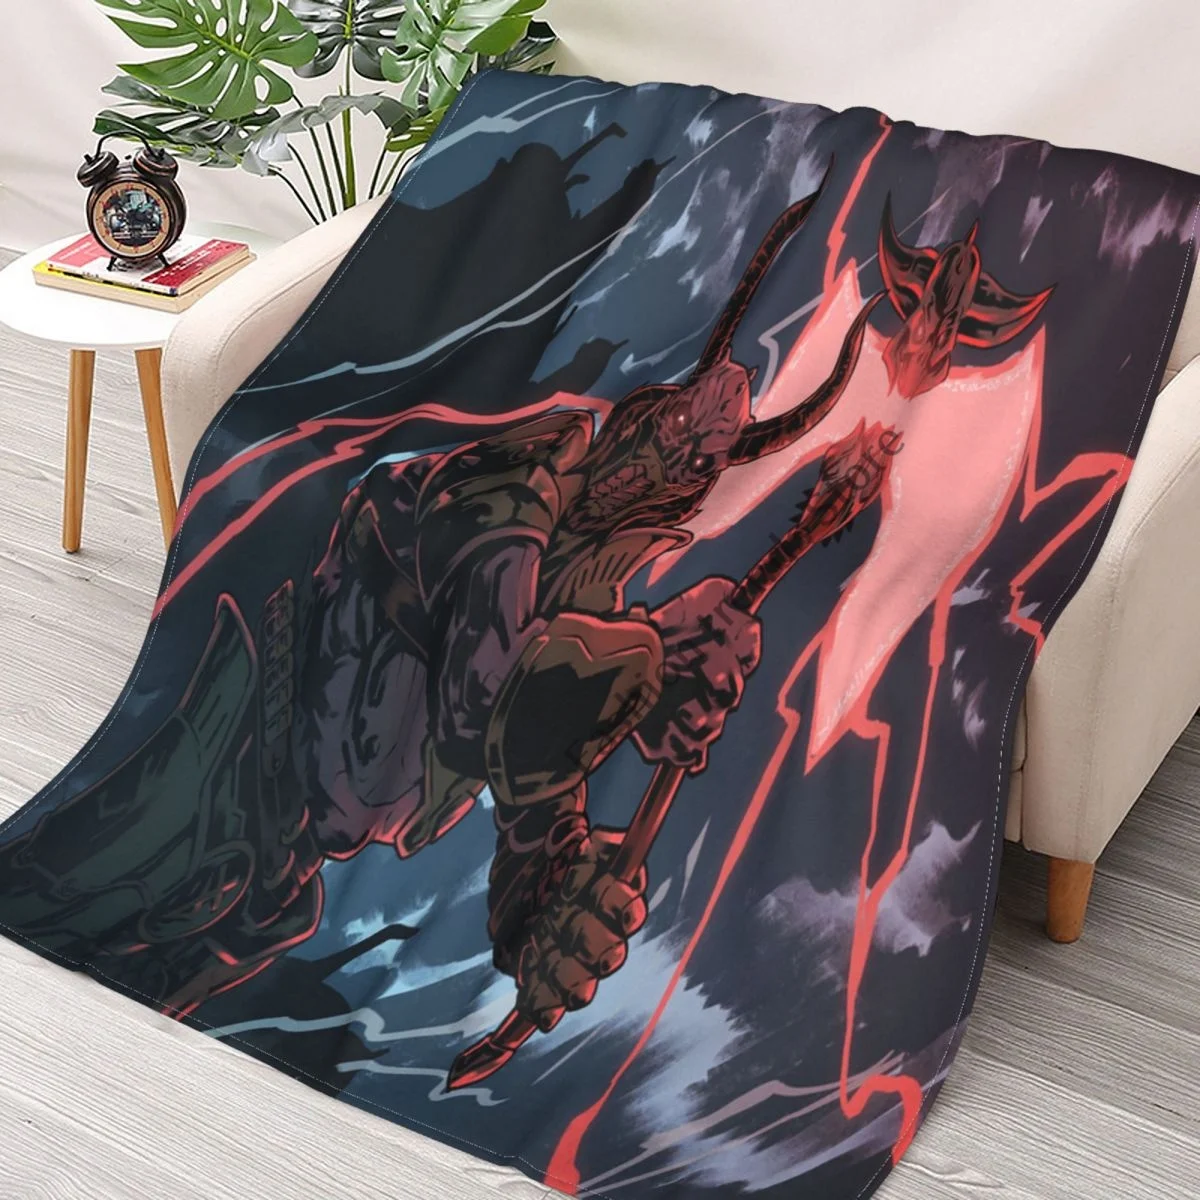 

Doom Game Blankets Flannel Printed Doom Slayer Breathable Soft Throw Blanket for Bed Office Rug Piece